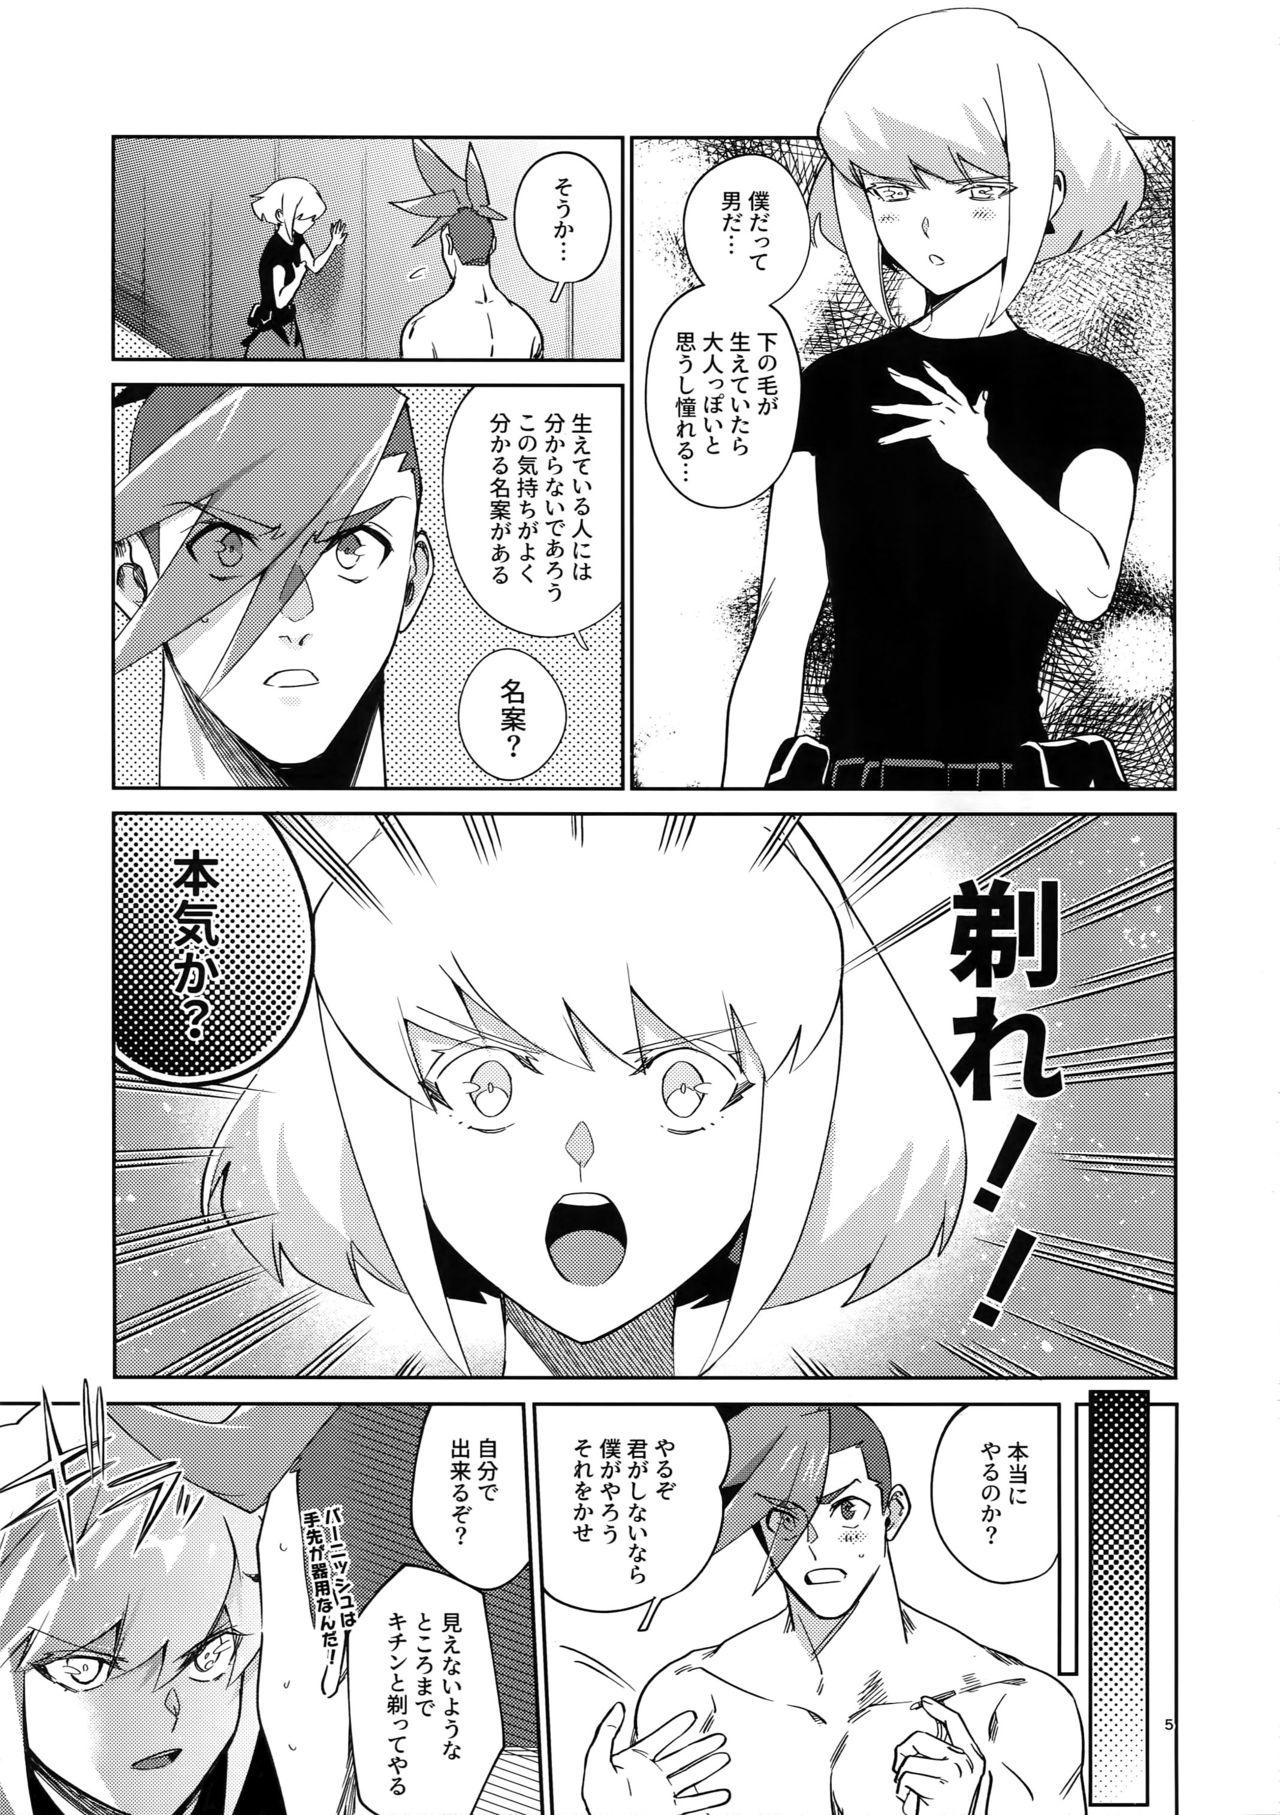 Jockstrap One and Only - Promare Negro - Page 4